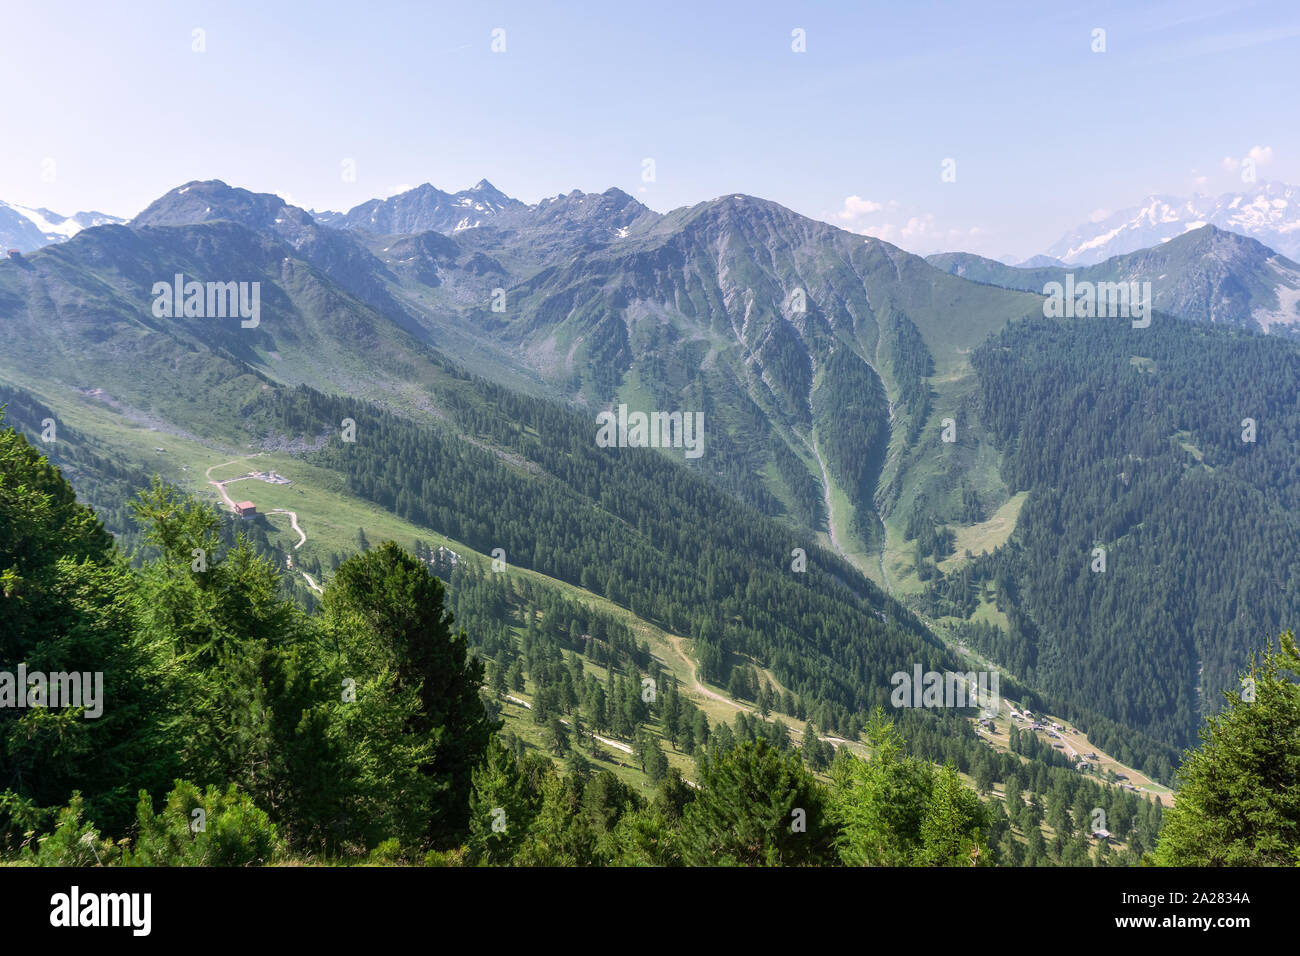 Mountains in the Swiss Alps, with wooded slopes and a mountain road. Stock Photo